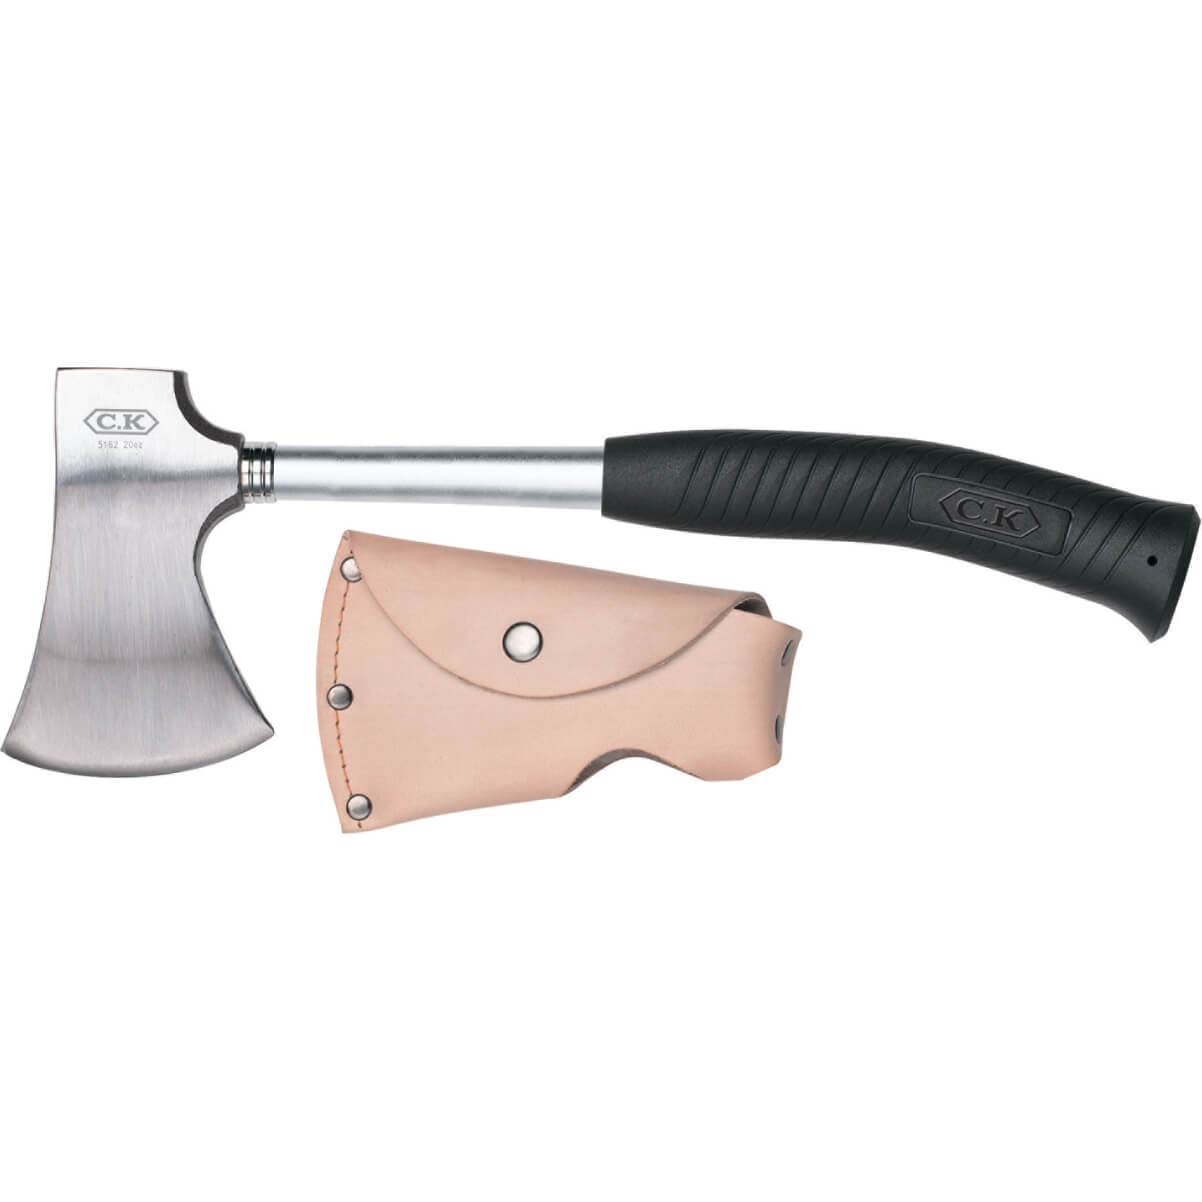 Image of CK Steel Hatchet Axe and Leather Sheath 330mm 0.8kg